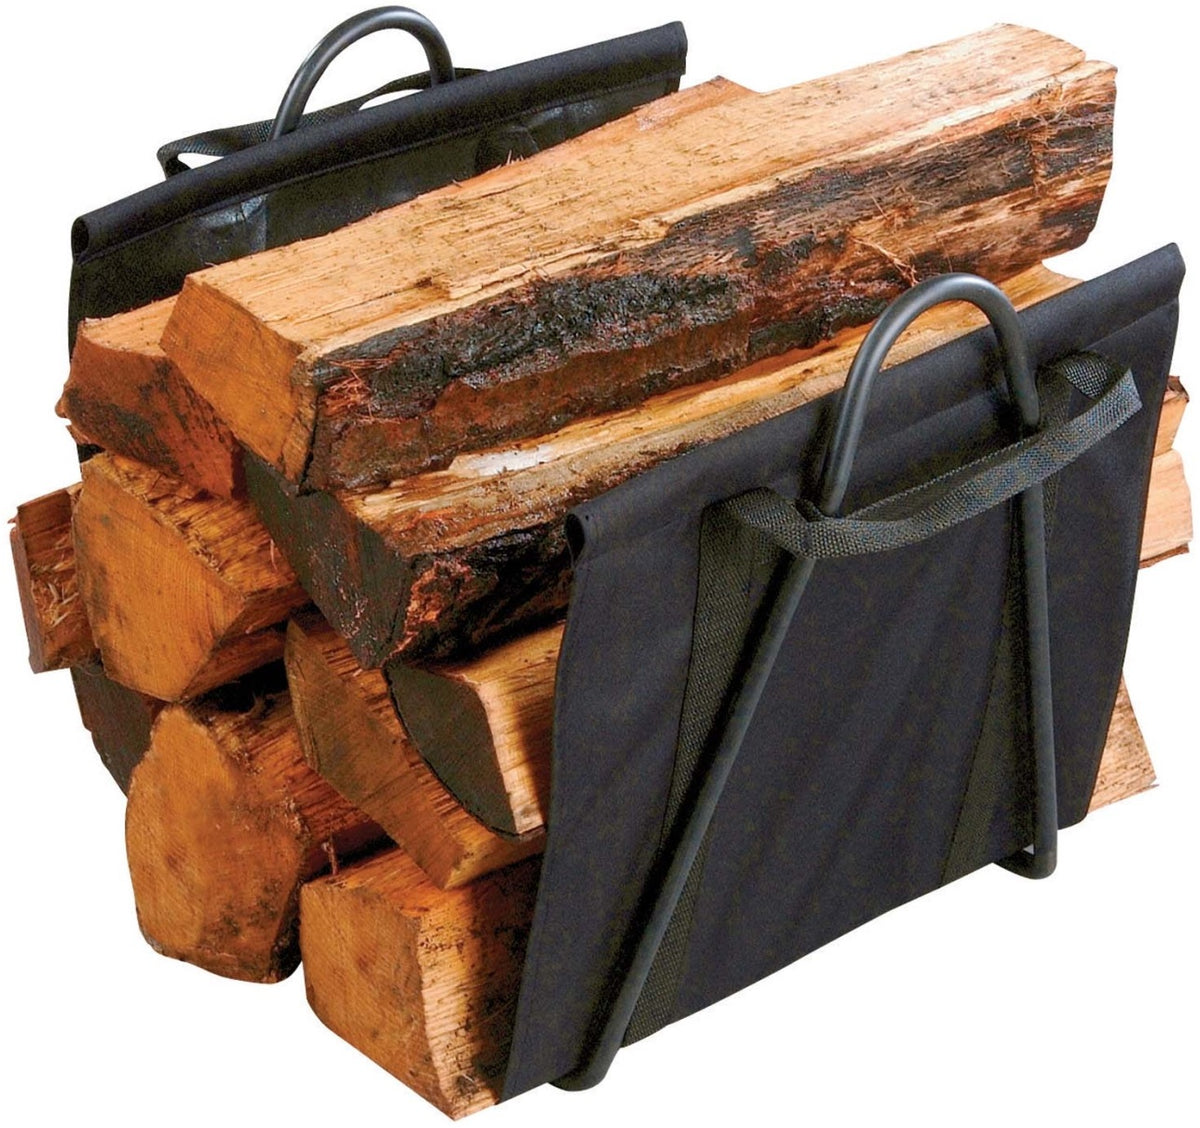 buy log racks at cheap rate in bulk. wholesale & retail fireplace goods & accessories store.